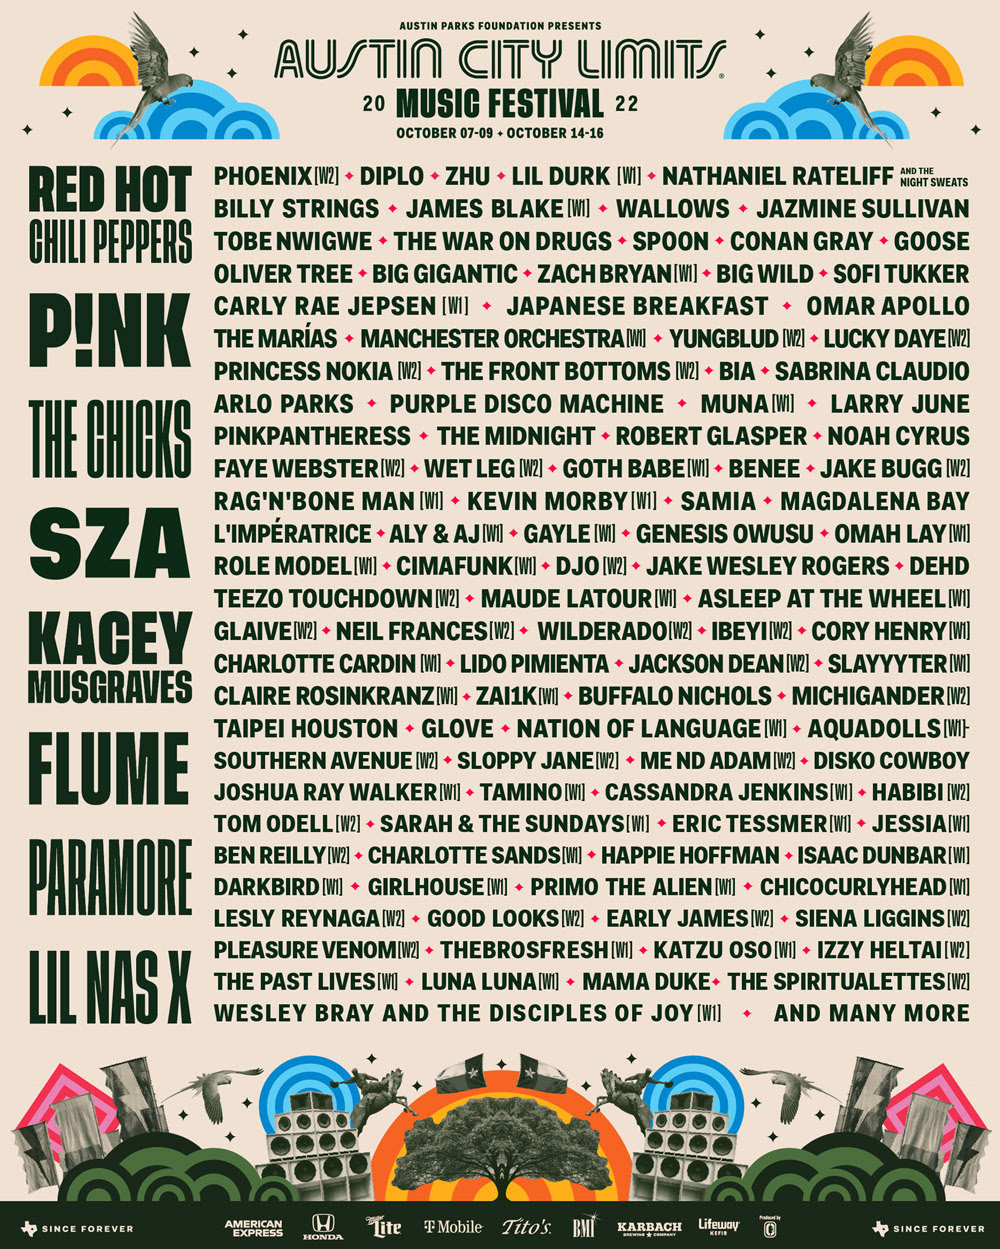 The Austin City Limits Music Festival 2022 Lineup. Photo provided.